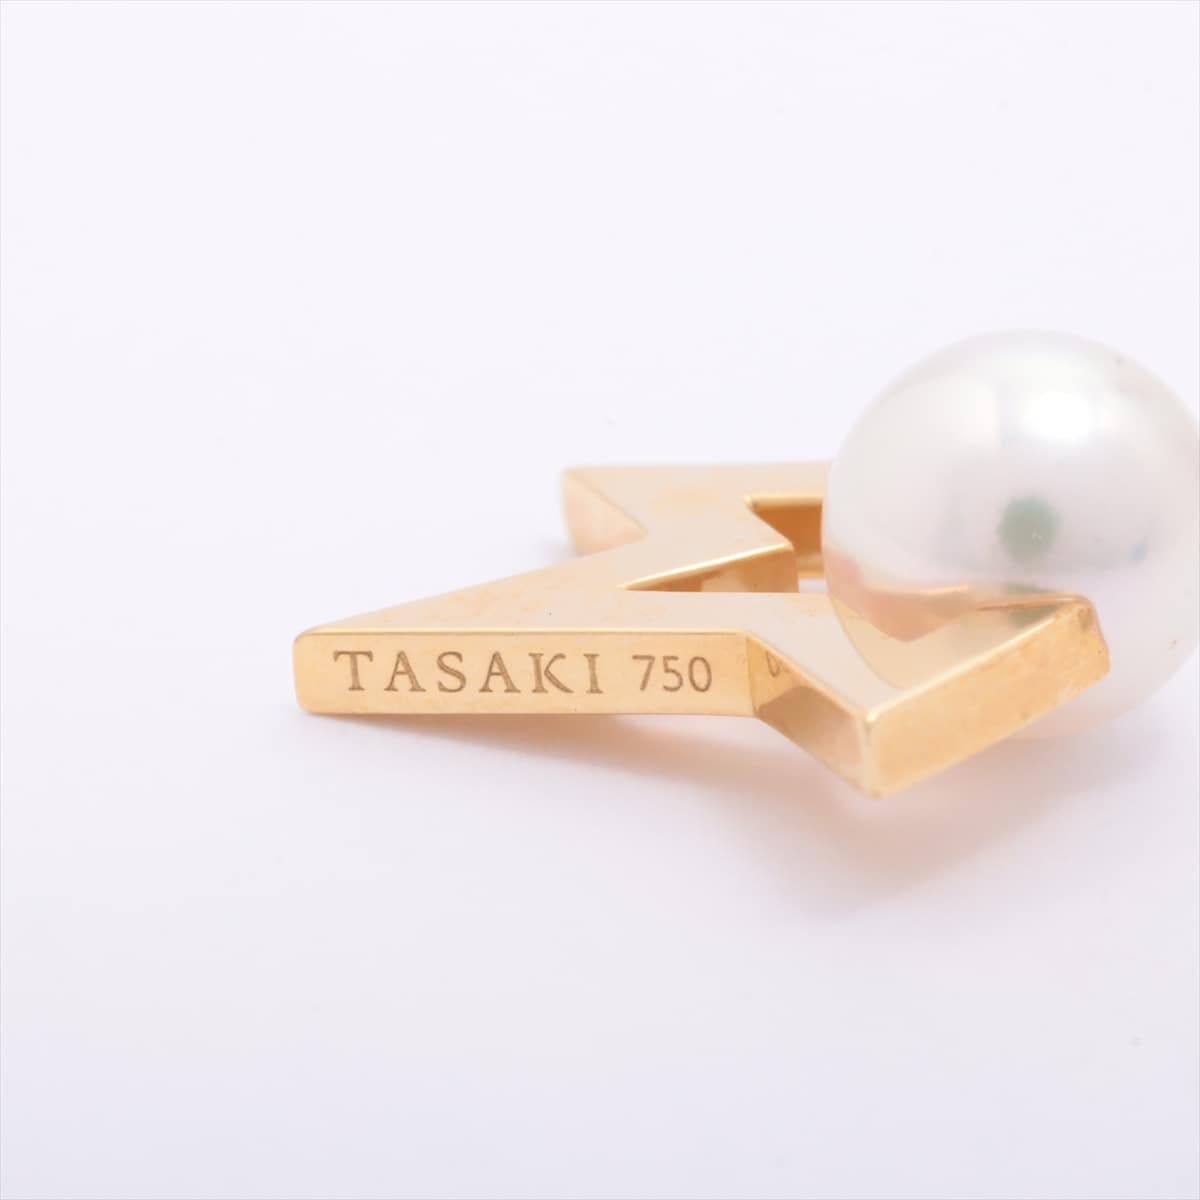 TASAKI Comet pluses Pearl Piercing jewelry 750(YG) 5.1g about 6.5mm